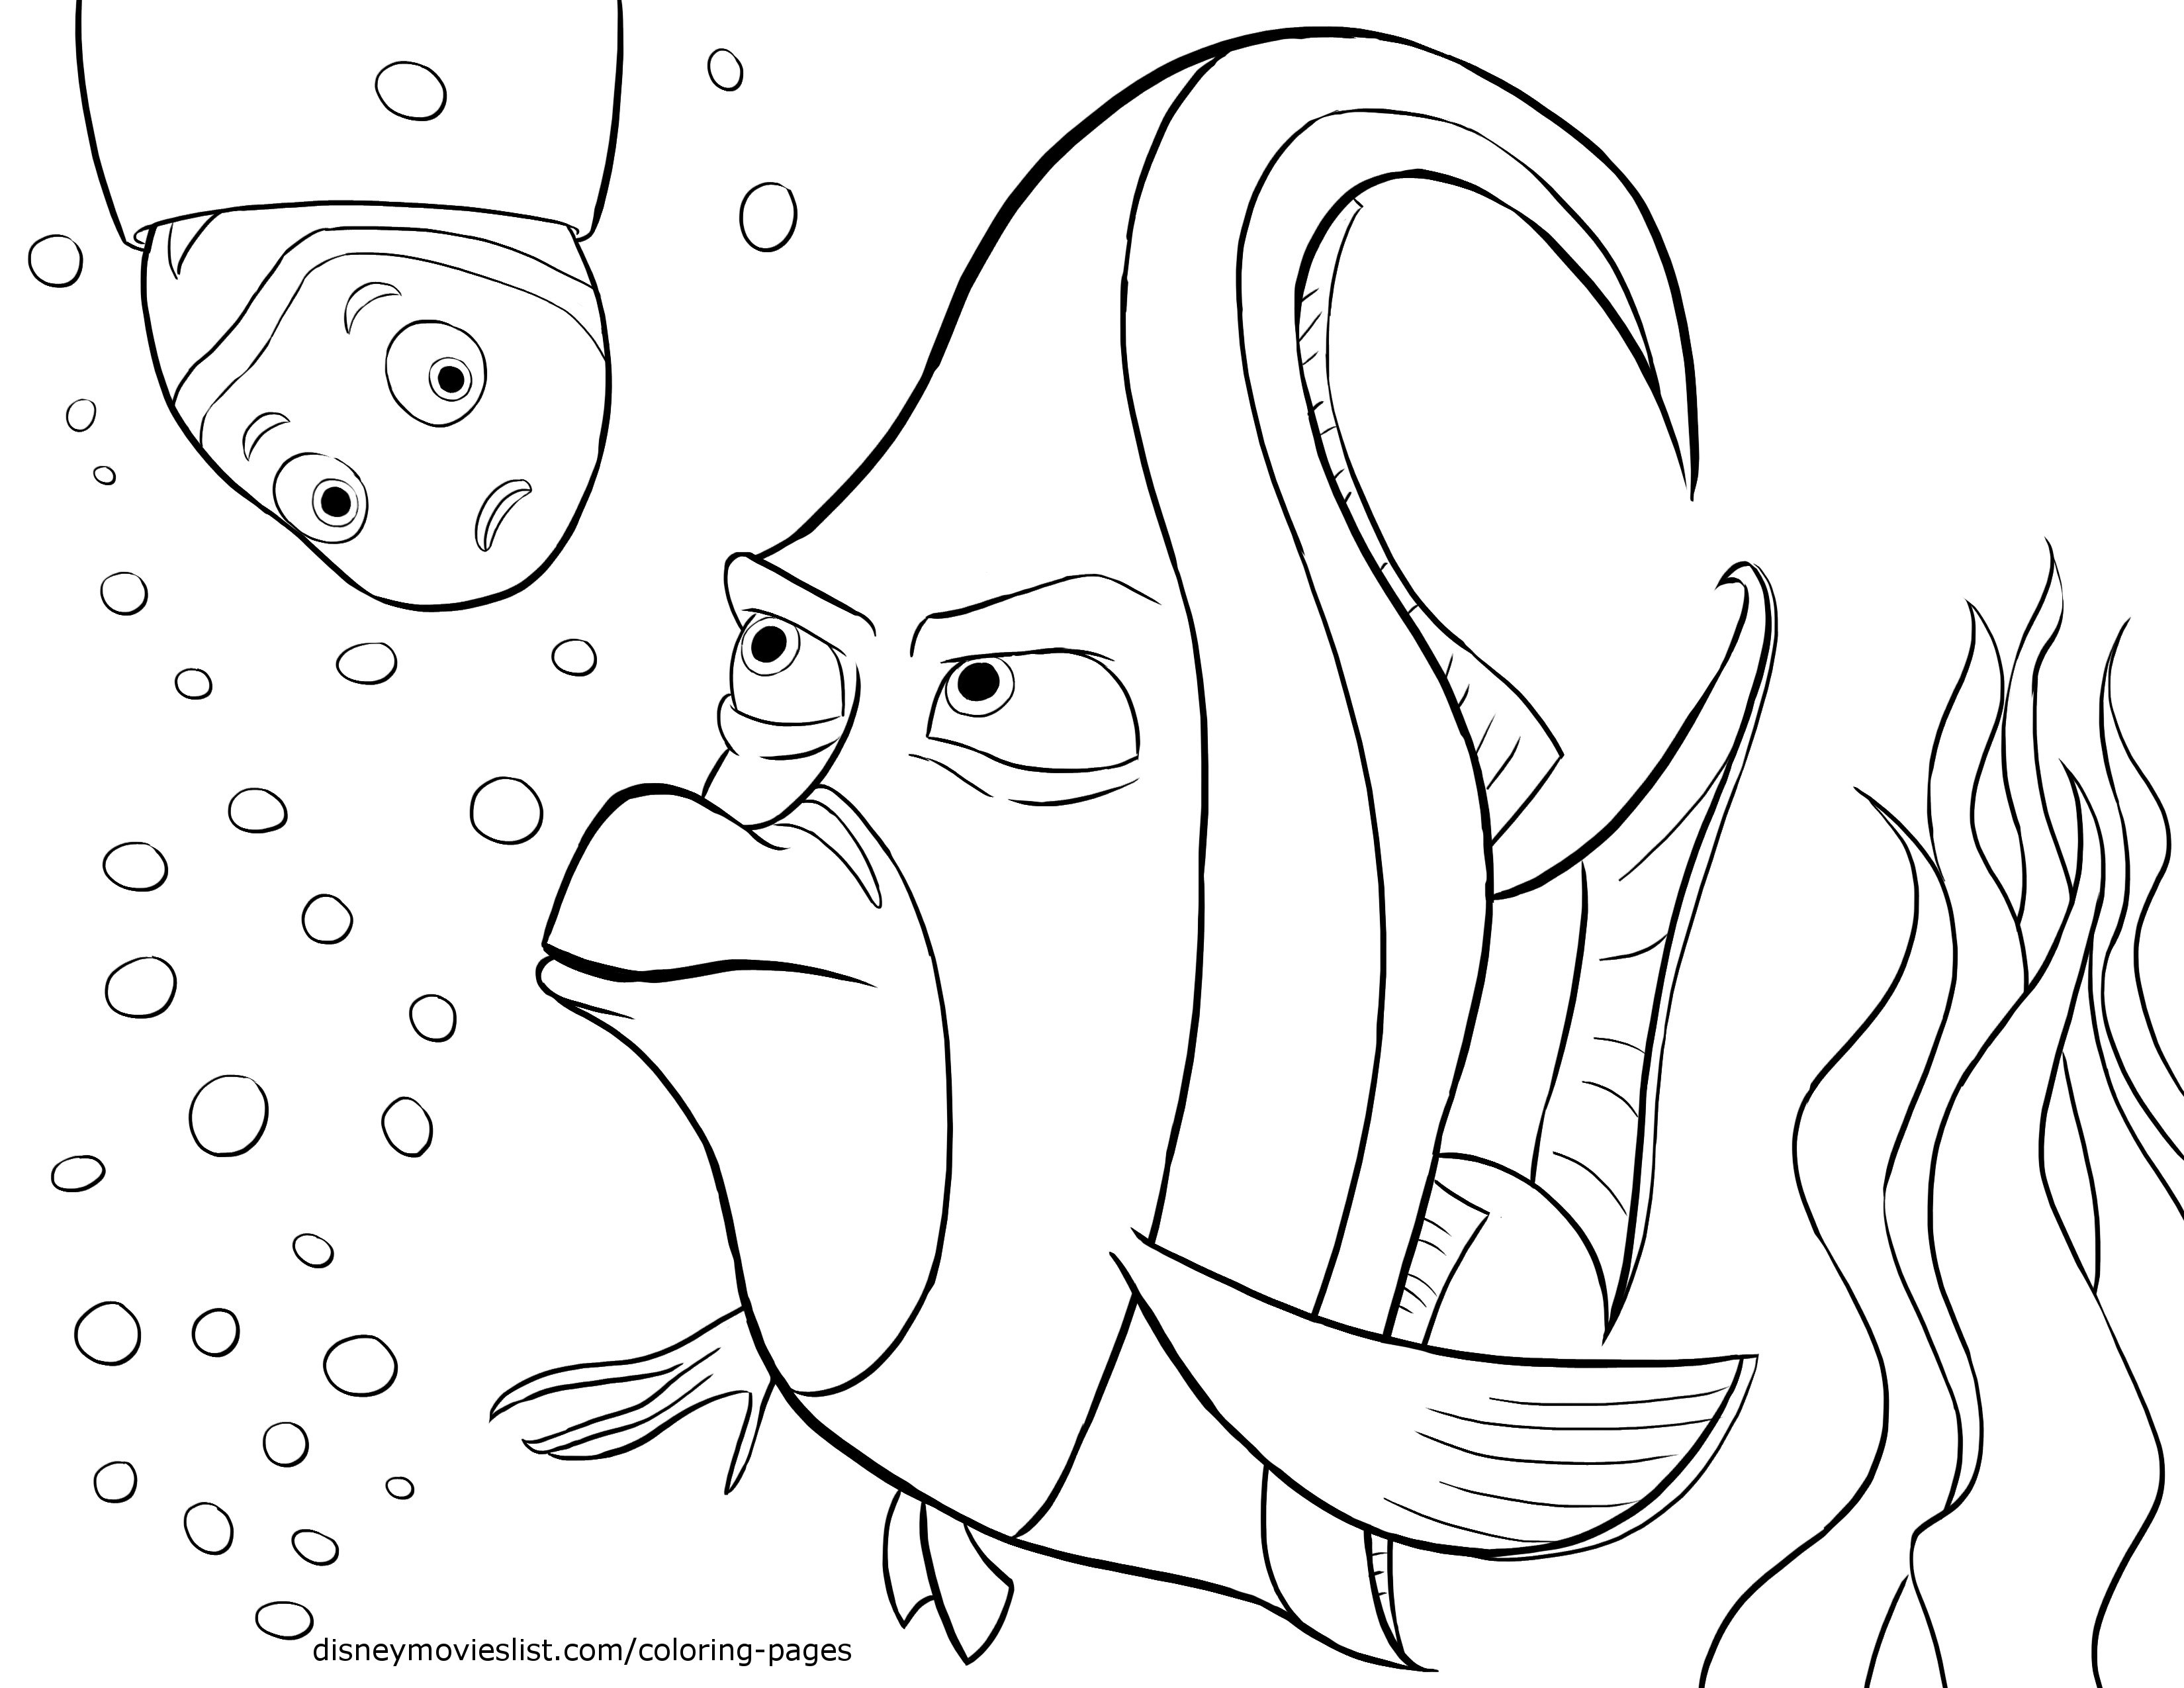 Finding Nemo Bruce Coloring Pages at Free printable